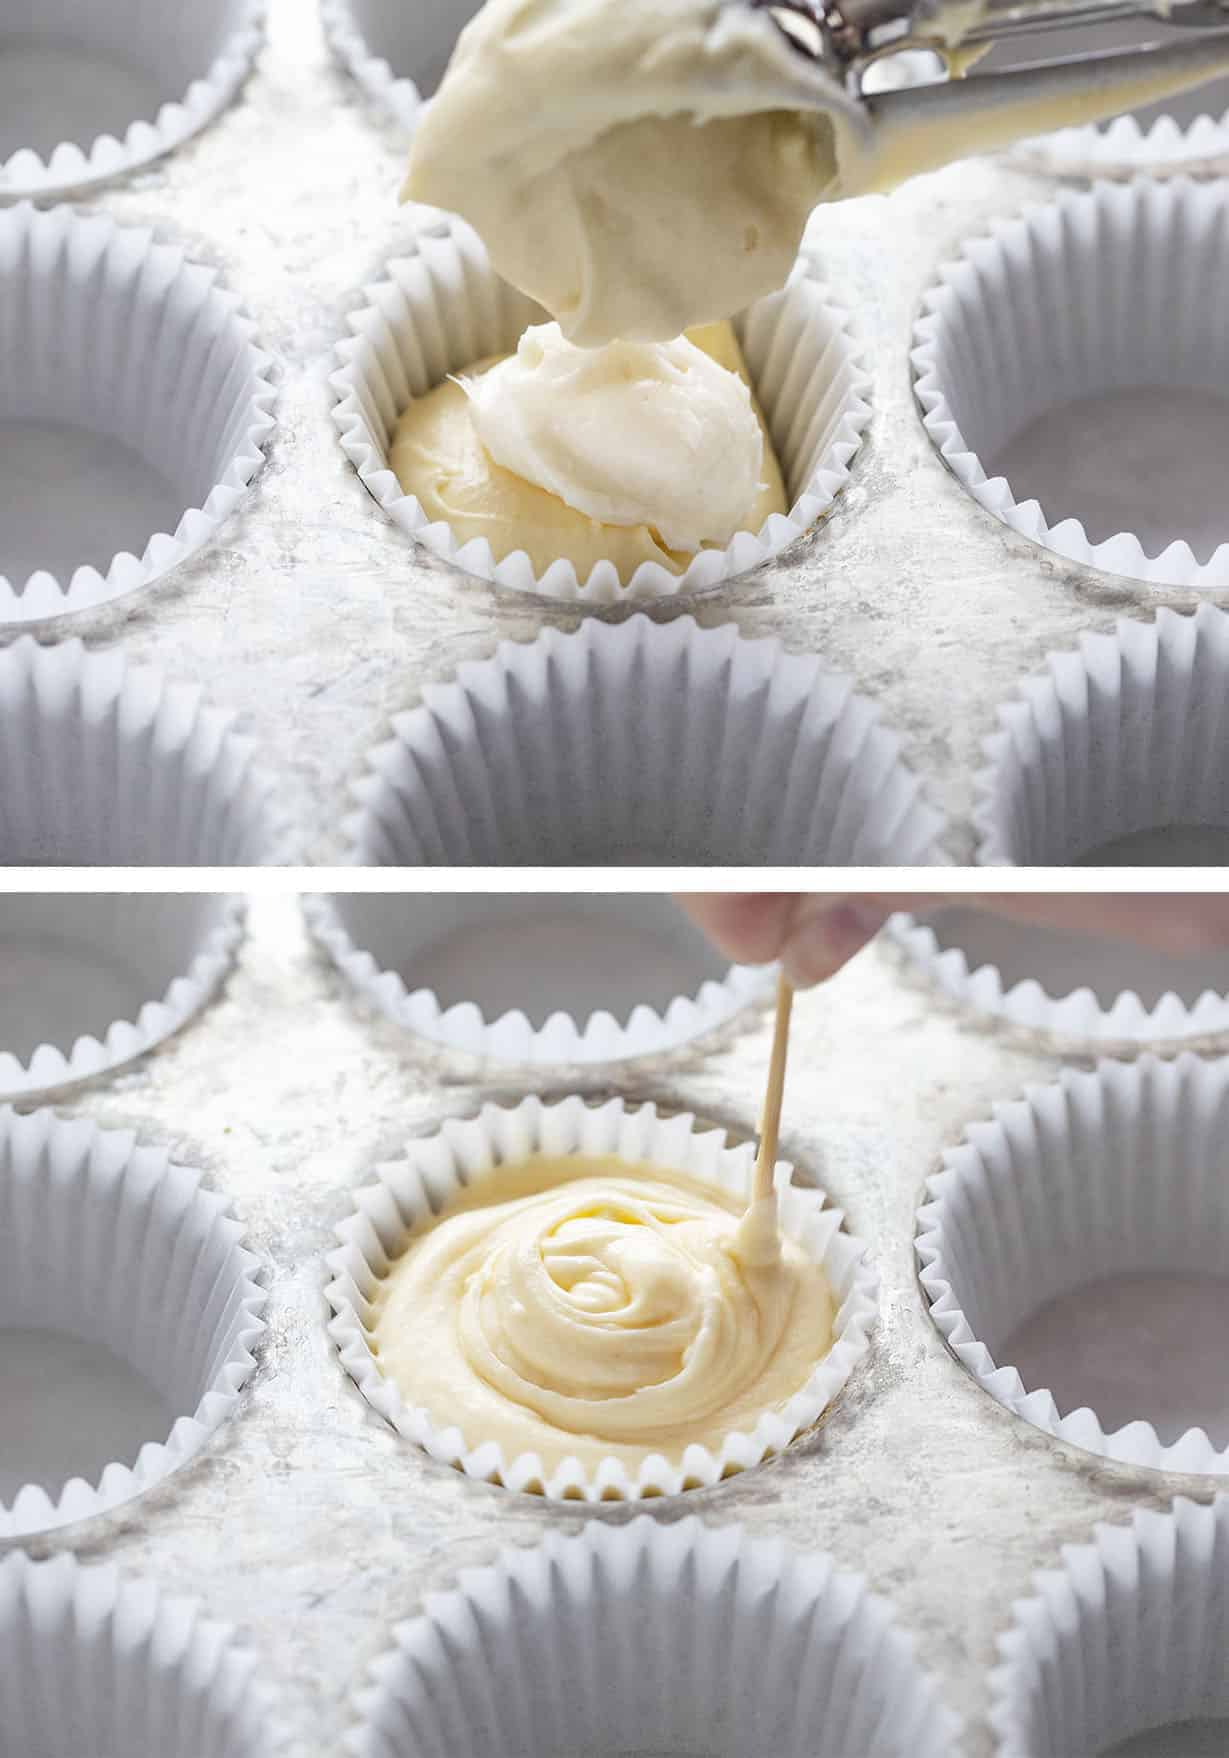 Adding Cream Cheese to Muffin Batter and Swirling